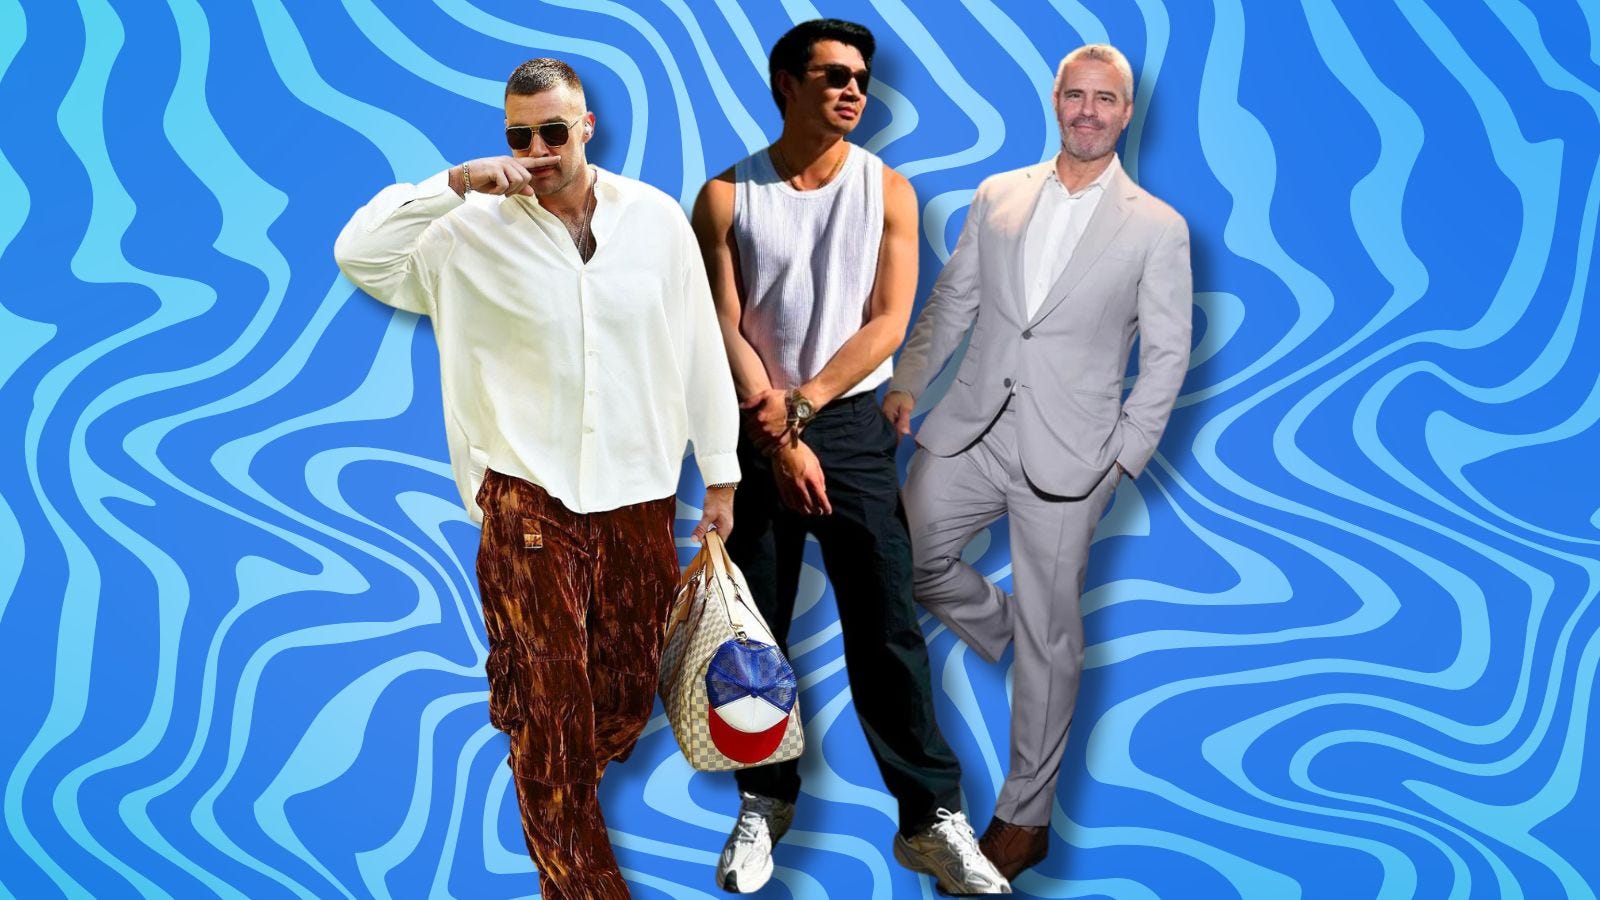 images of travis kelce, simu liu, and andy cohen against a blue background